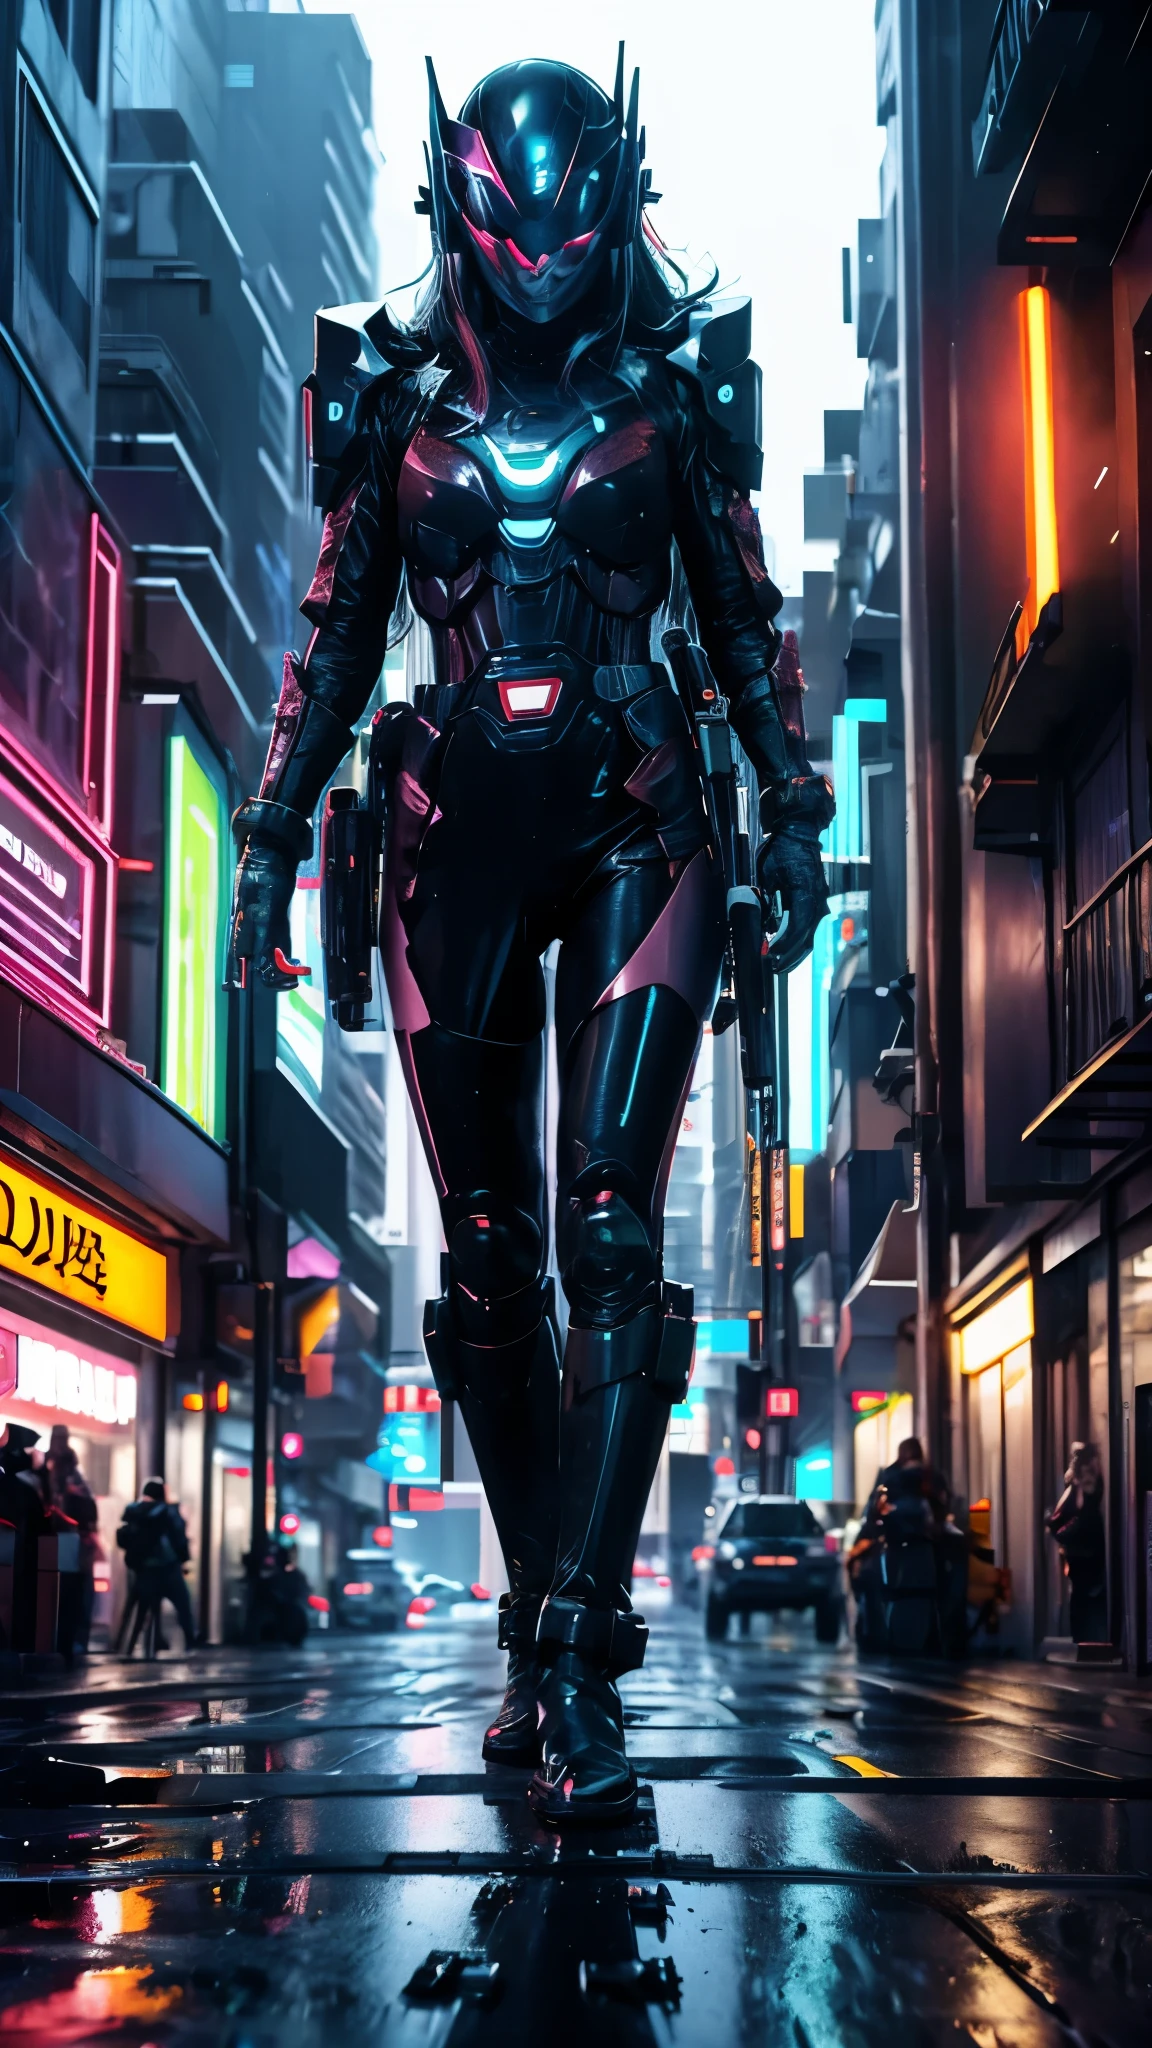 (highres,photorealistic),ranger girl,running,cyberpunk city,long hair,athletic build,fast movement,motion blur,neon lights,futuristic architecture,hovering vehicles,modern technology,dense population,tall skyscrapers,heavy rain,reflective surfaces,dark alleyways,glowing signs,shadows,metallic textures,gritty atmosphere,cool color palette,strong contrast,dynamic composition,rain-soaked streets,dystopian vibe,cityscape,adventure,excitement